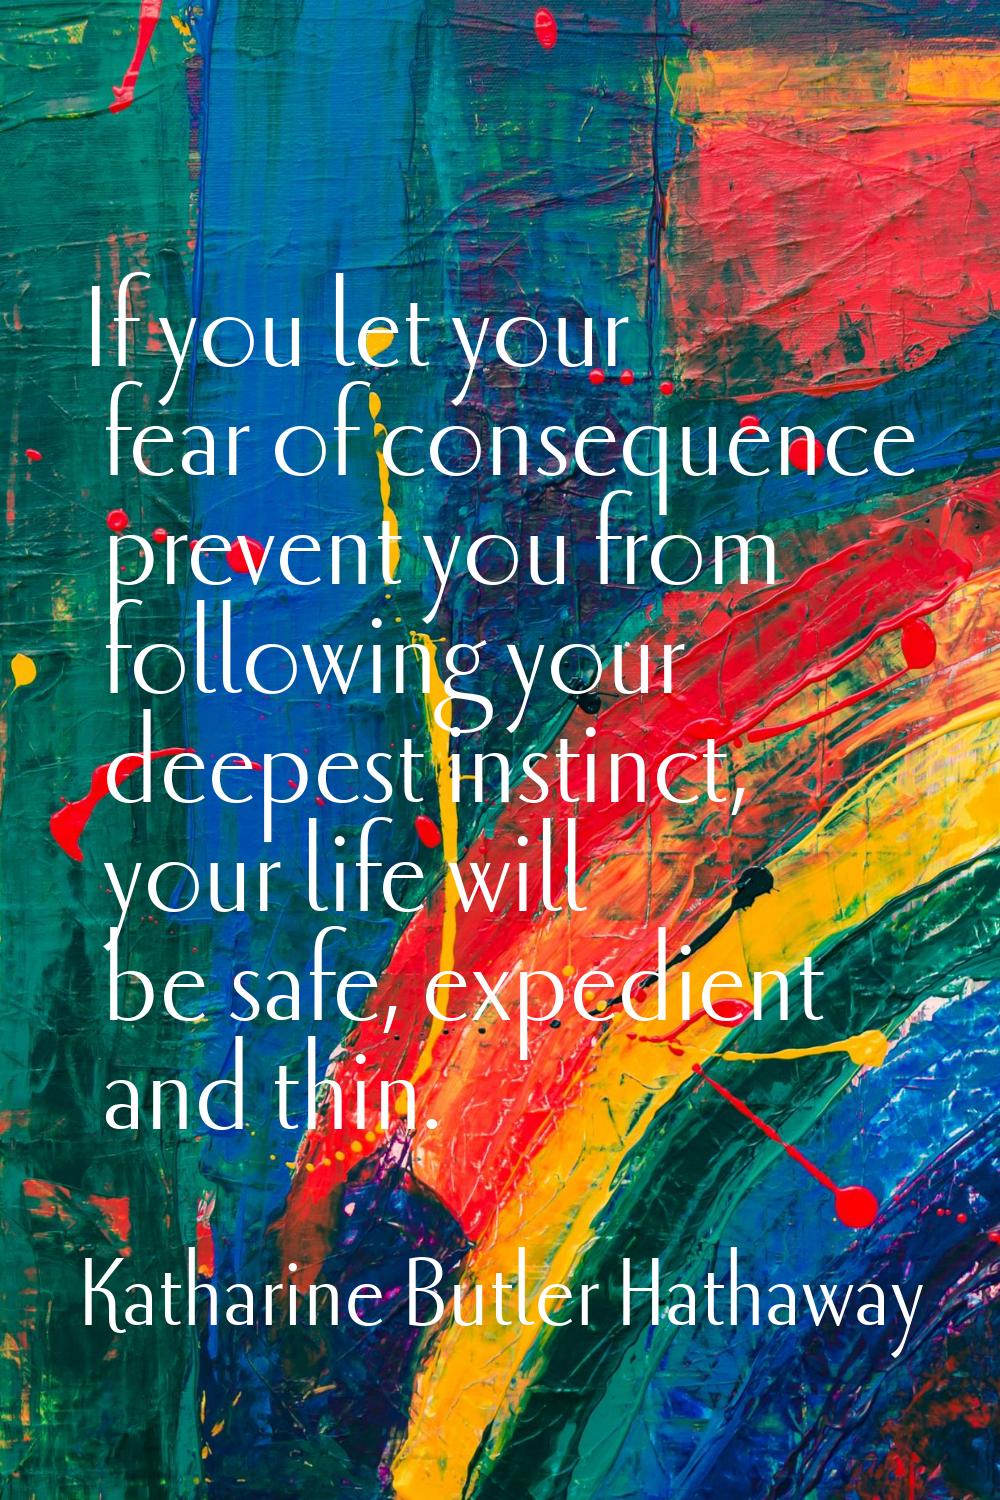 If you let your fear of consequence prevent you from following your deepest instinct, your life wil